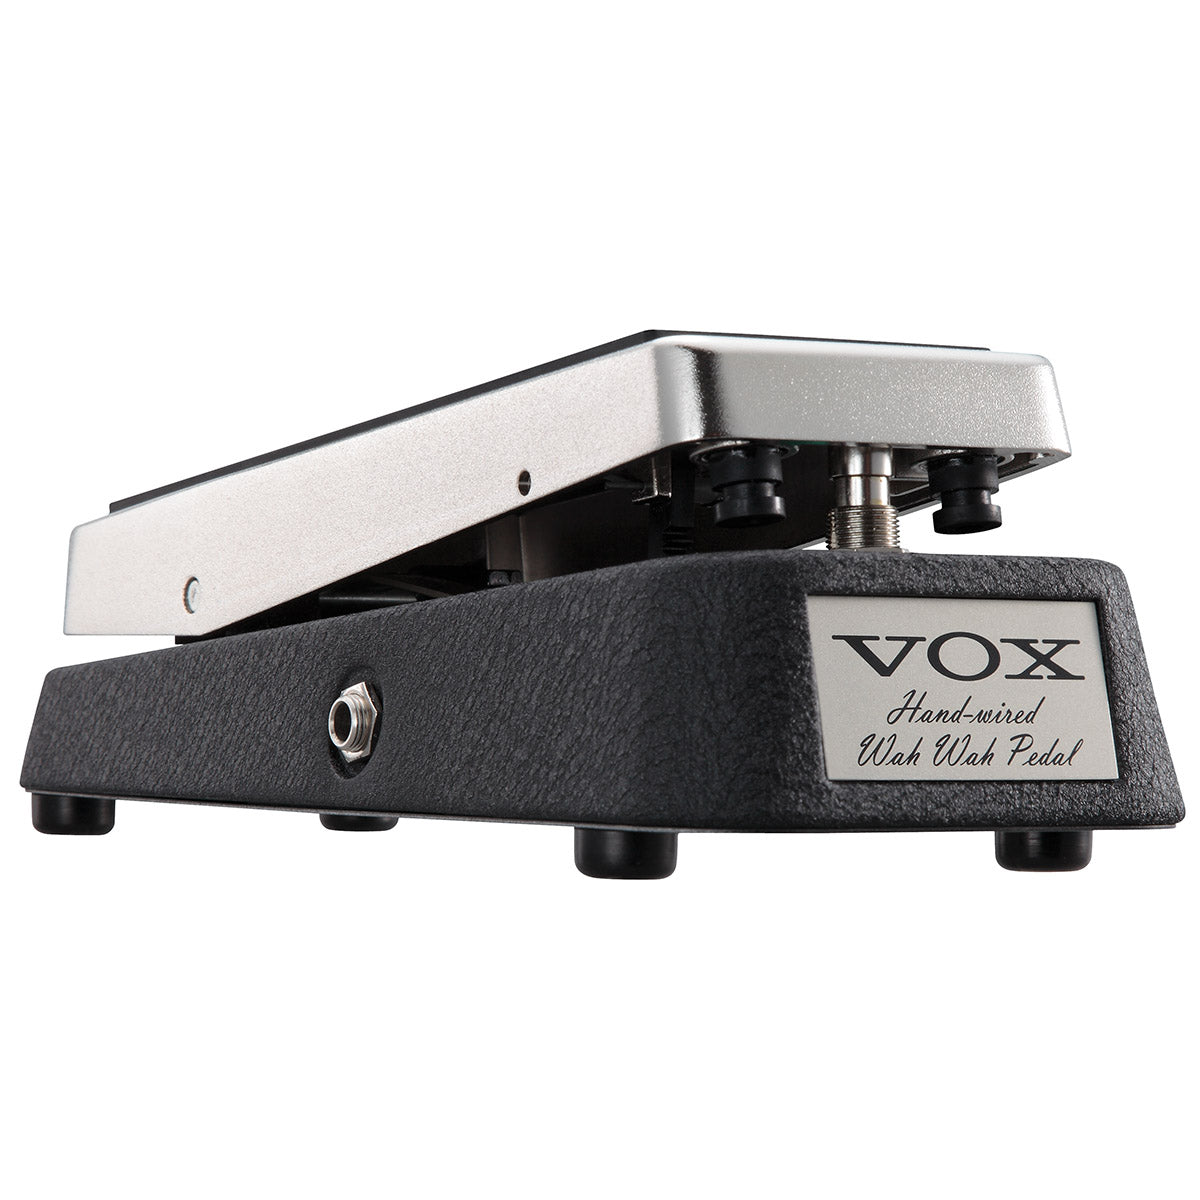 Hand-Wired Wah Pedal Vox Amp Shop